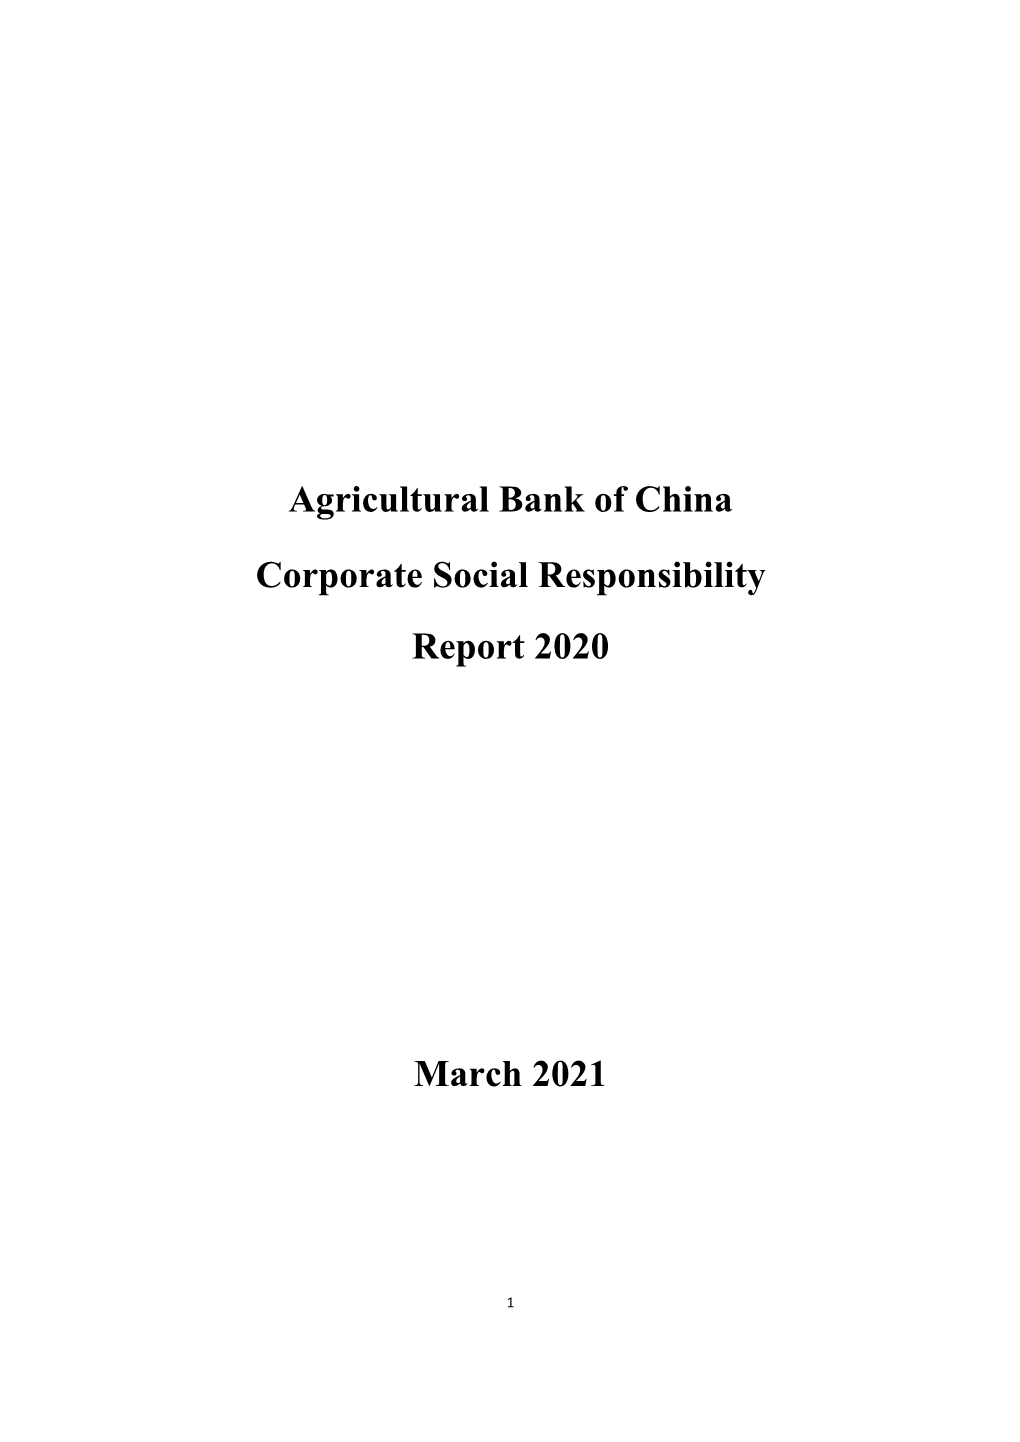 Agricultural Bank of China Corporate Social Responsibility Report 2020